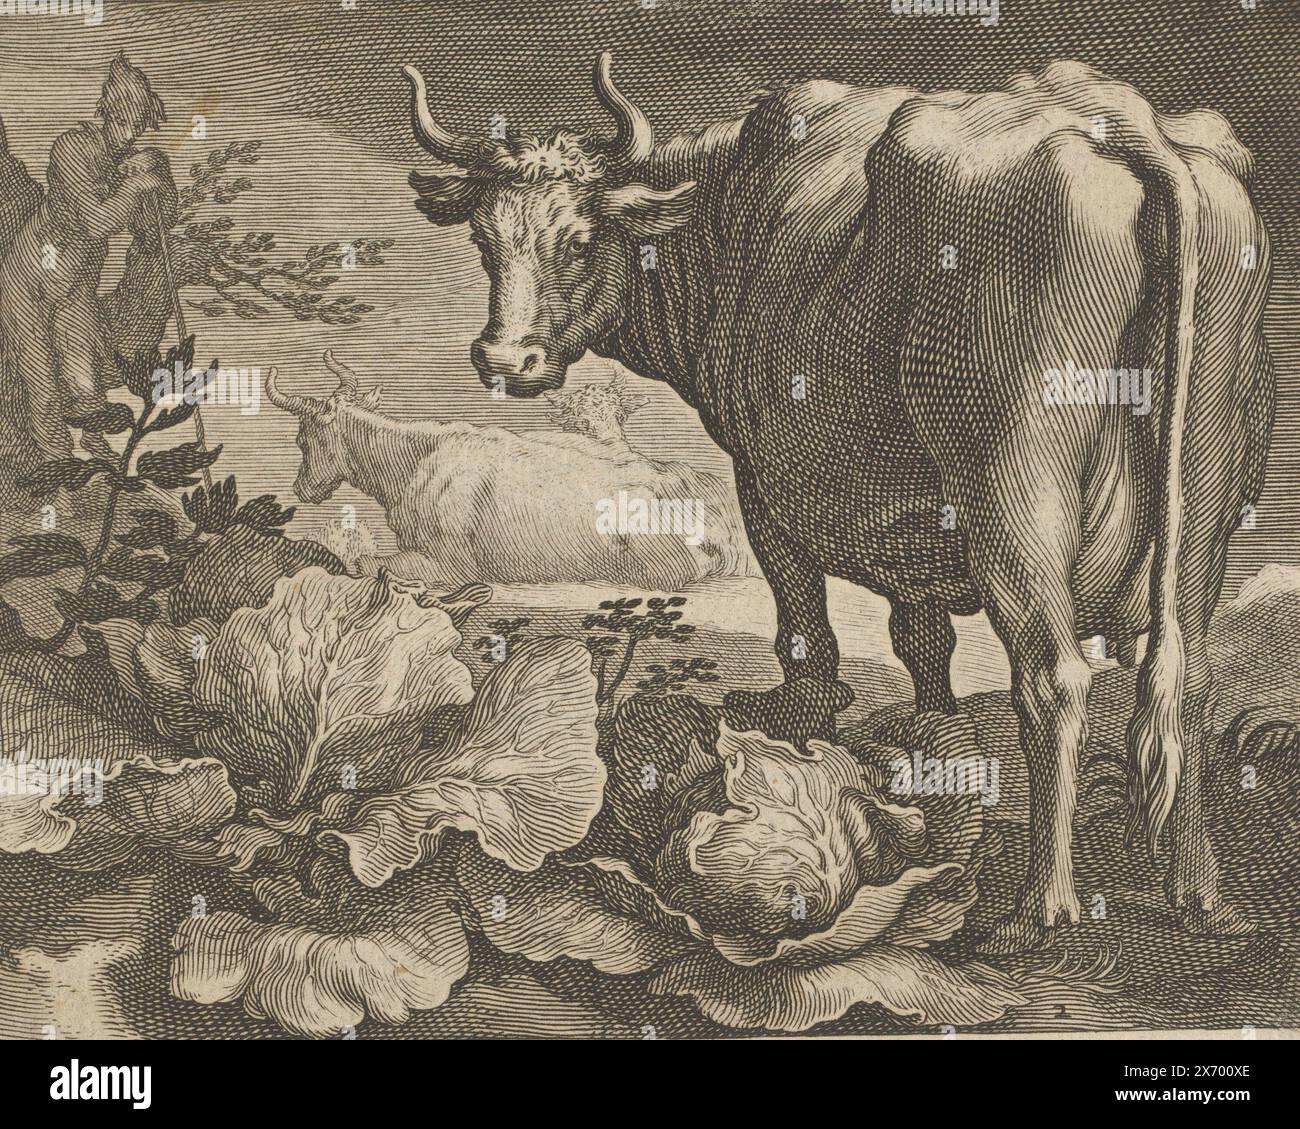 Cows, Pastorals (series title), numbered bottom right: 2., print, print maker: Boëtius Adamsz. Bolswert, after design by: Abraham Bloemaert, publisher: Wilhelmus Koning, (possibly), Amsterdam, 1611 - 1632 and/or c. 1717 - 1732, paper, engraving, height, 113 mm × width, 144 mm Stock Photo